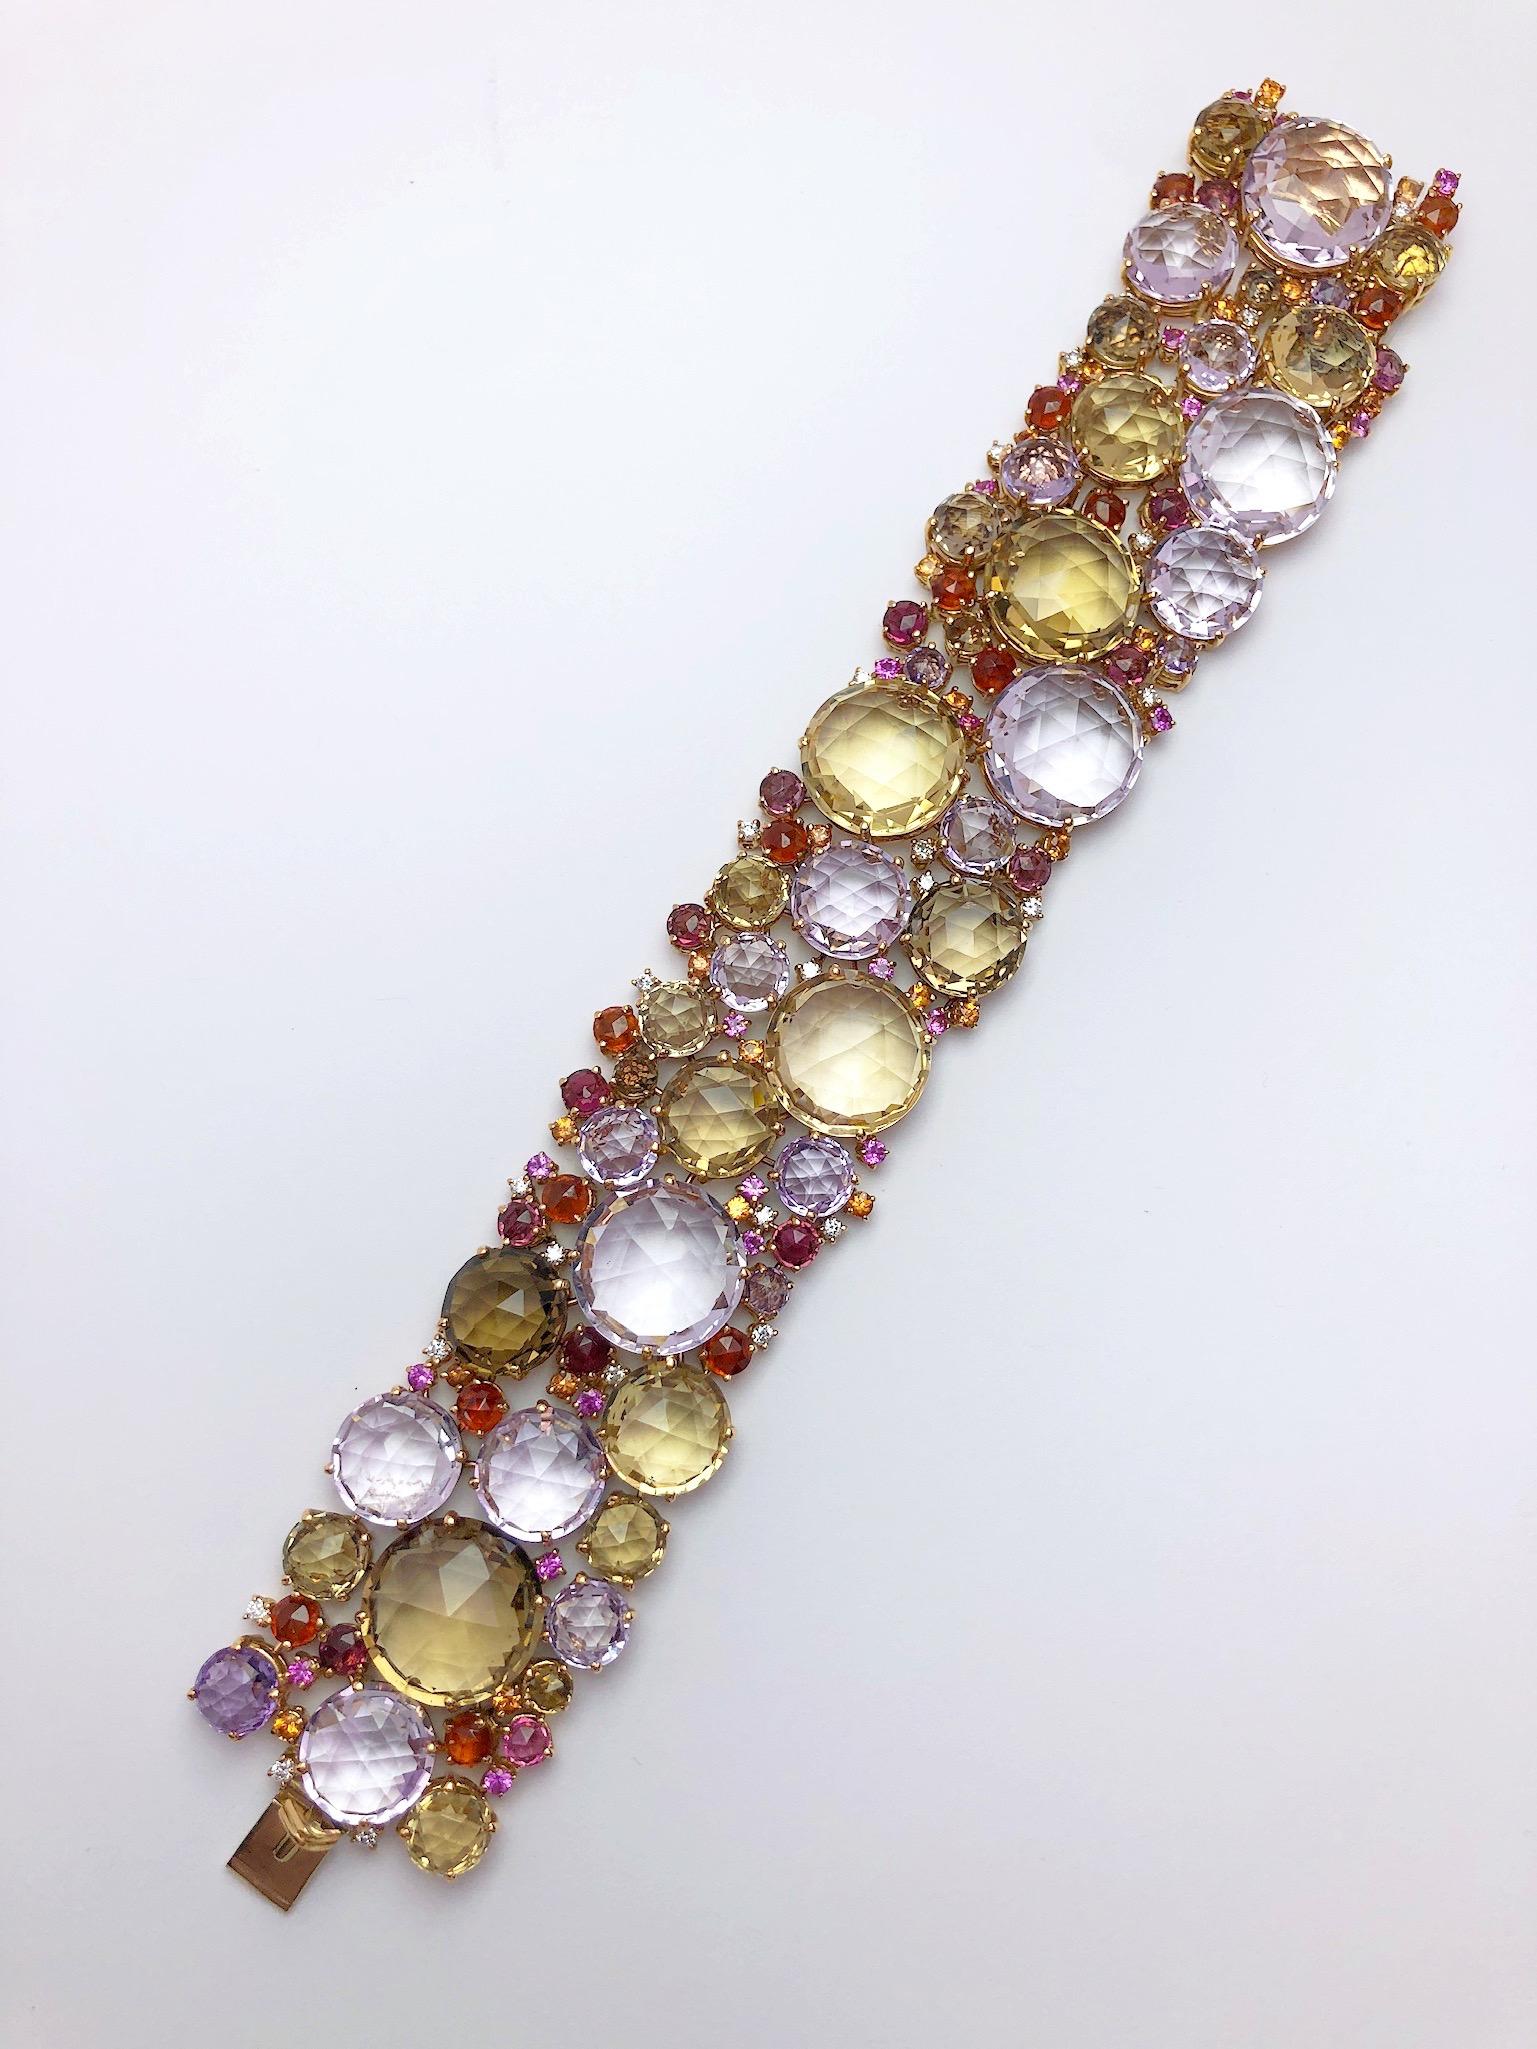 A & Furst 18 Karat RG Bracelet, 159 Carat Semi Precious, Sapphires and Diamonds In New Condition For Sale In New York, NY